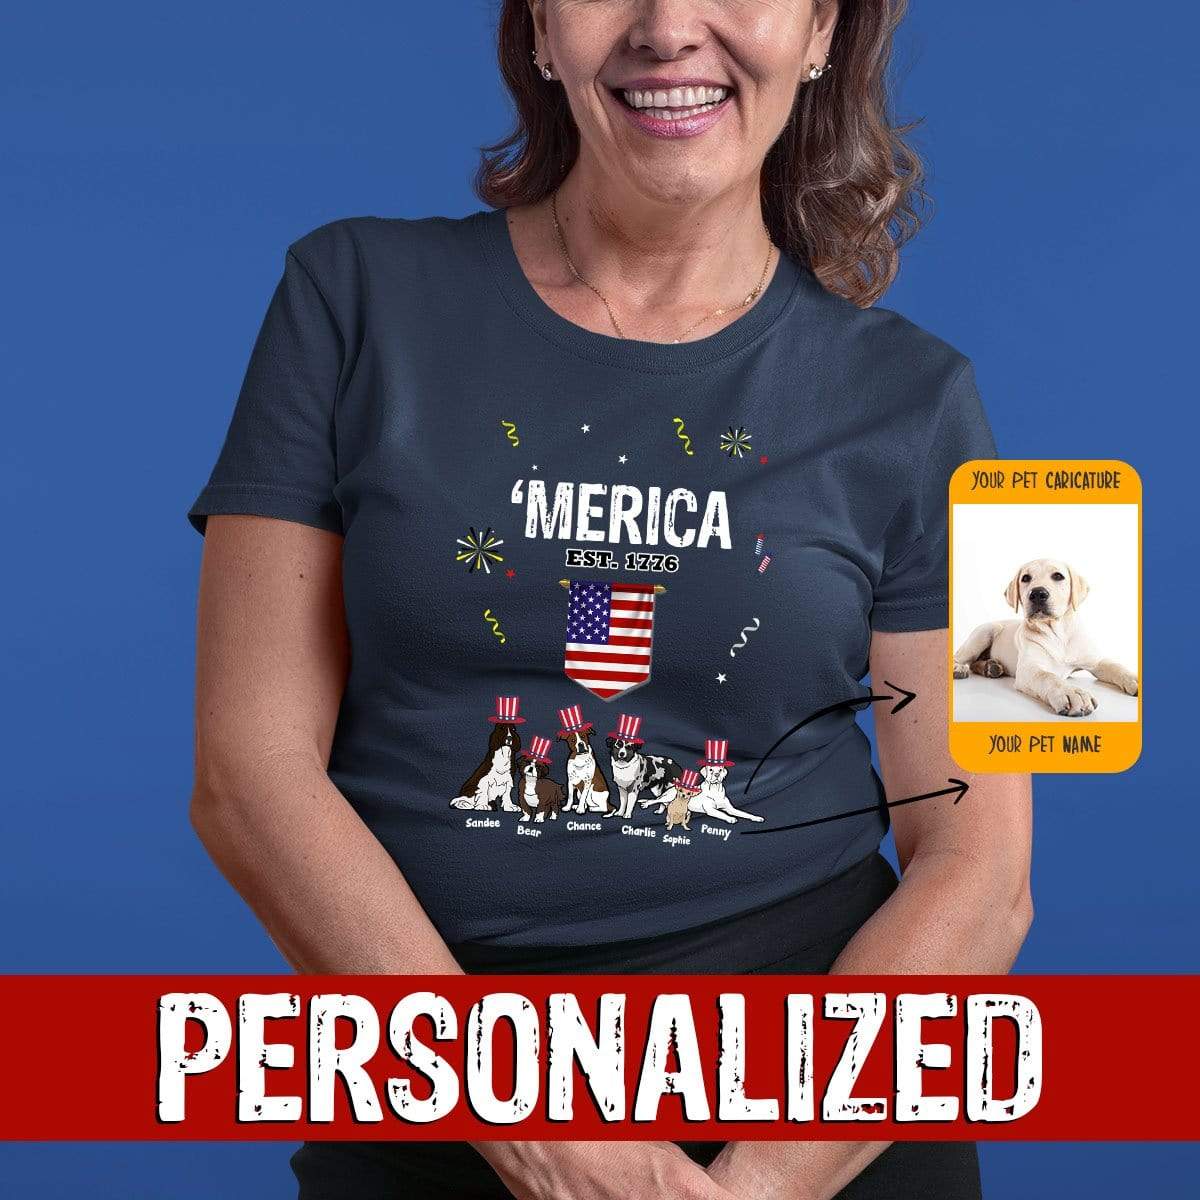 Personalized Dog Mom Gifts By Pupnpaws Cotton T-shirt T-shirt / Navy / S "MERICA" Personalized Tee For Dog Lovers